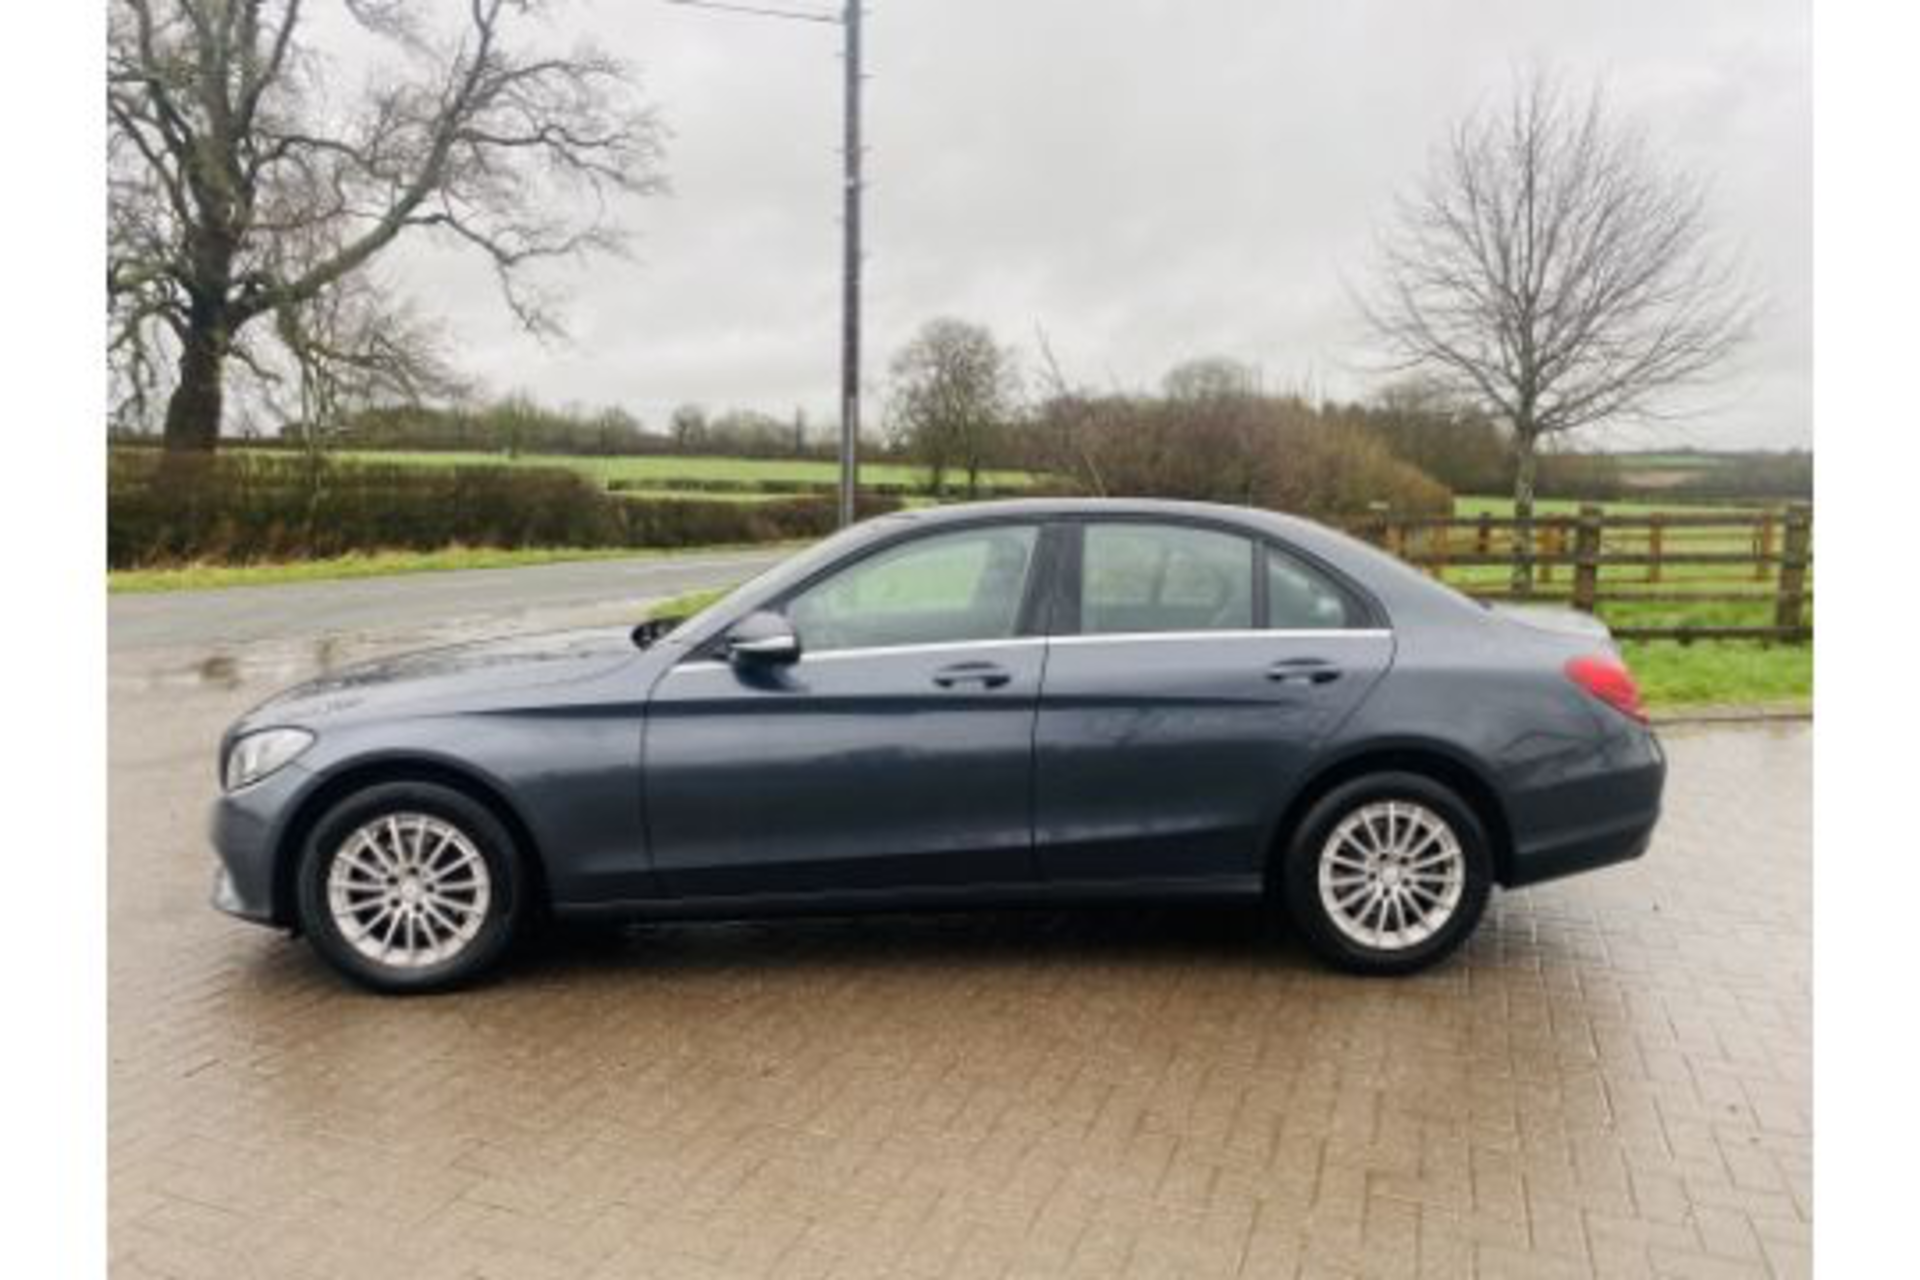 MERCEDES C220d "SPECIAL EQUIPMENT" SE SALOON - 2016 MODEL - LEATHER - NEW SHAPE - AIR CON - NO VAT!! - Image 8 of 26